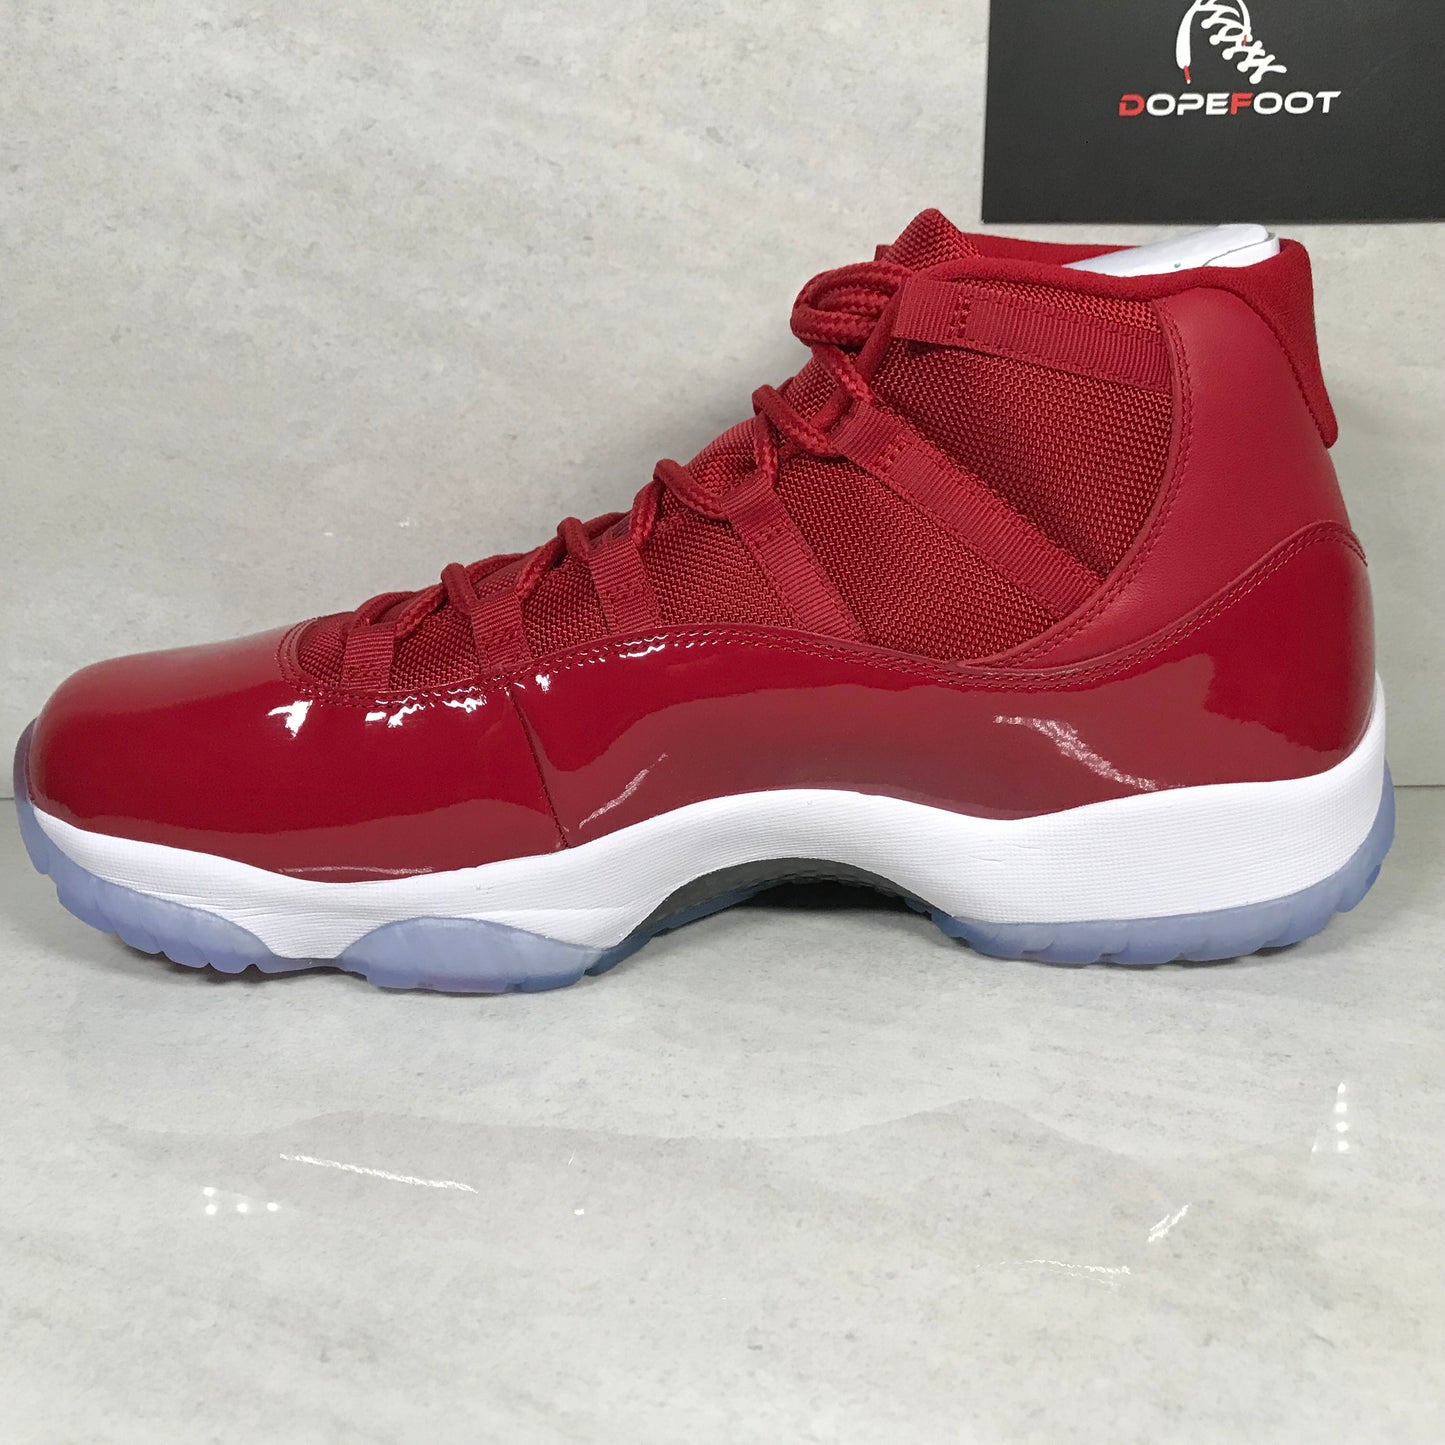 Air Jordan 11 XI Retro Win Like 96 - 378037-623 - Homme Taille 8.5/Taille 9/Taille 10